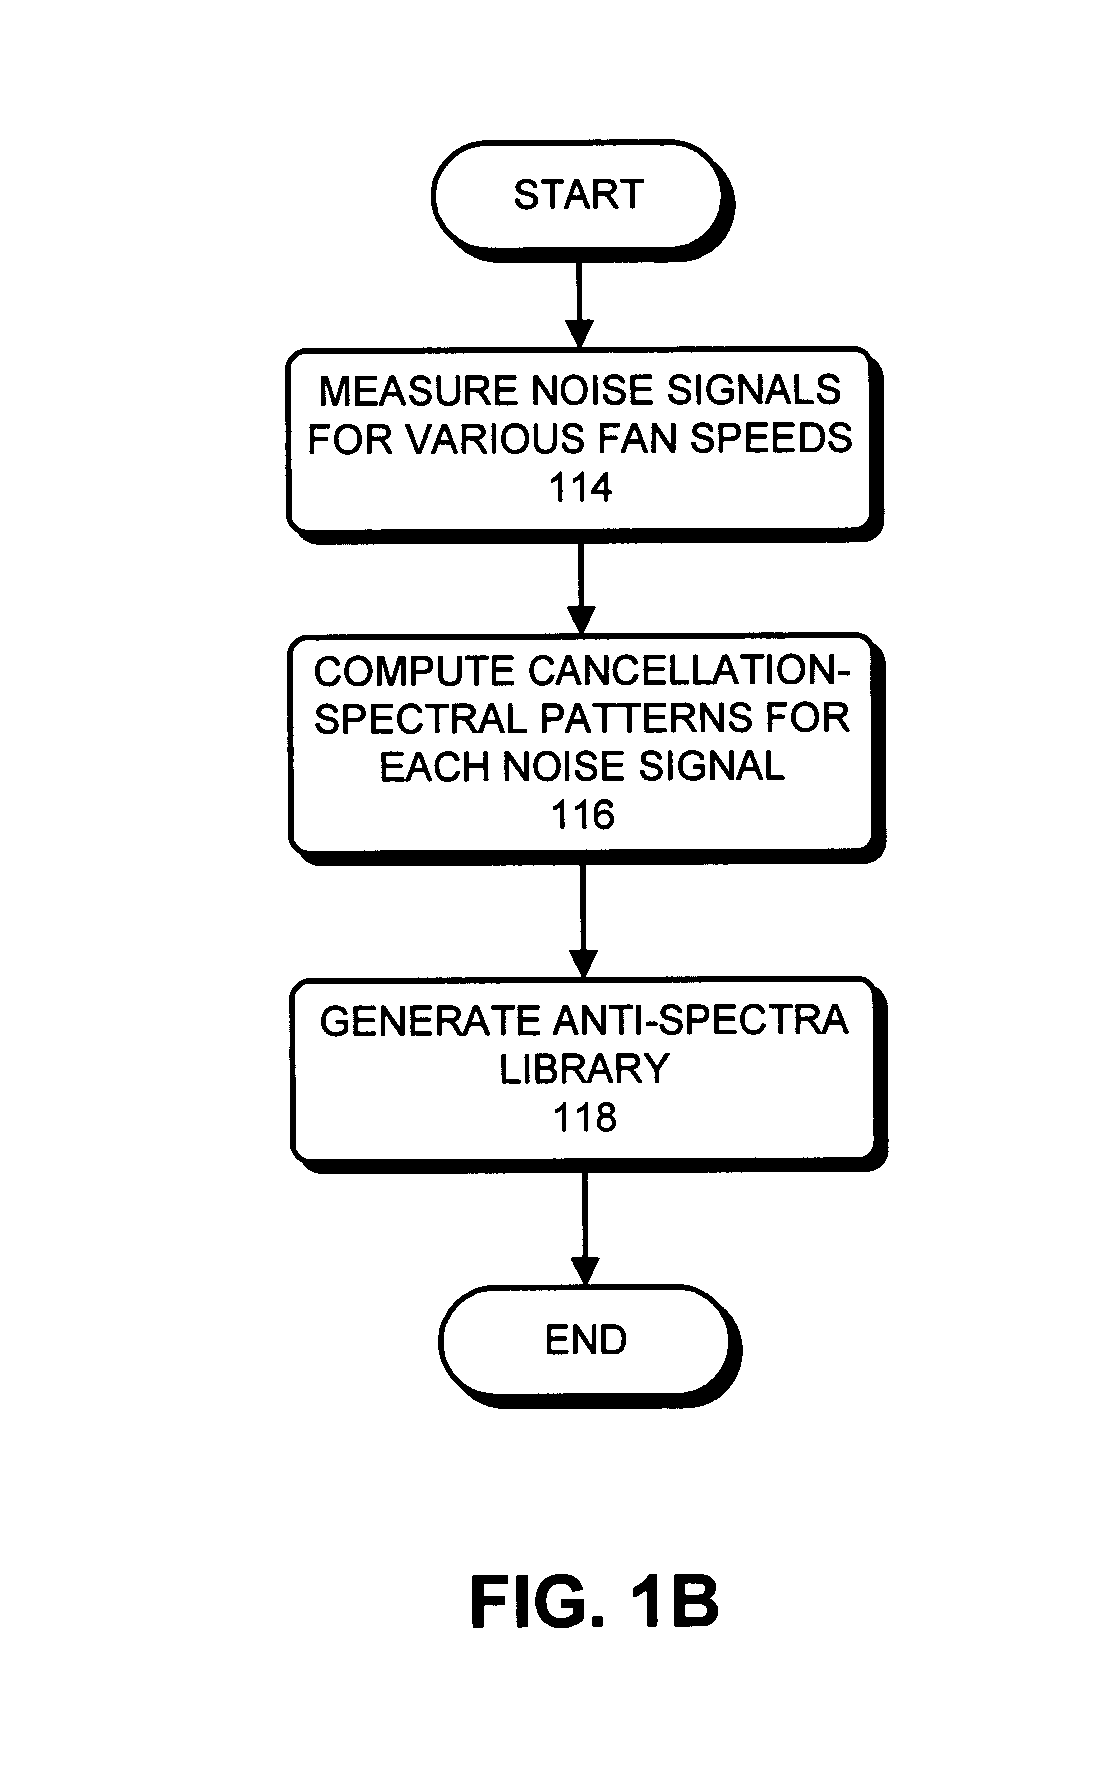 Method and apparatus for canceling fan noise in a computer system